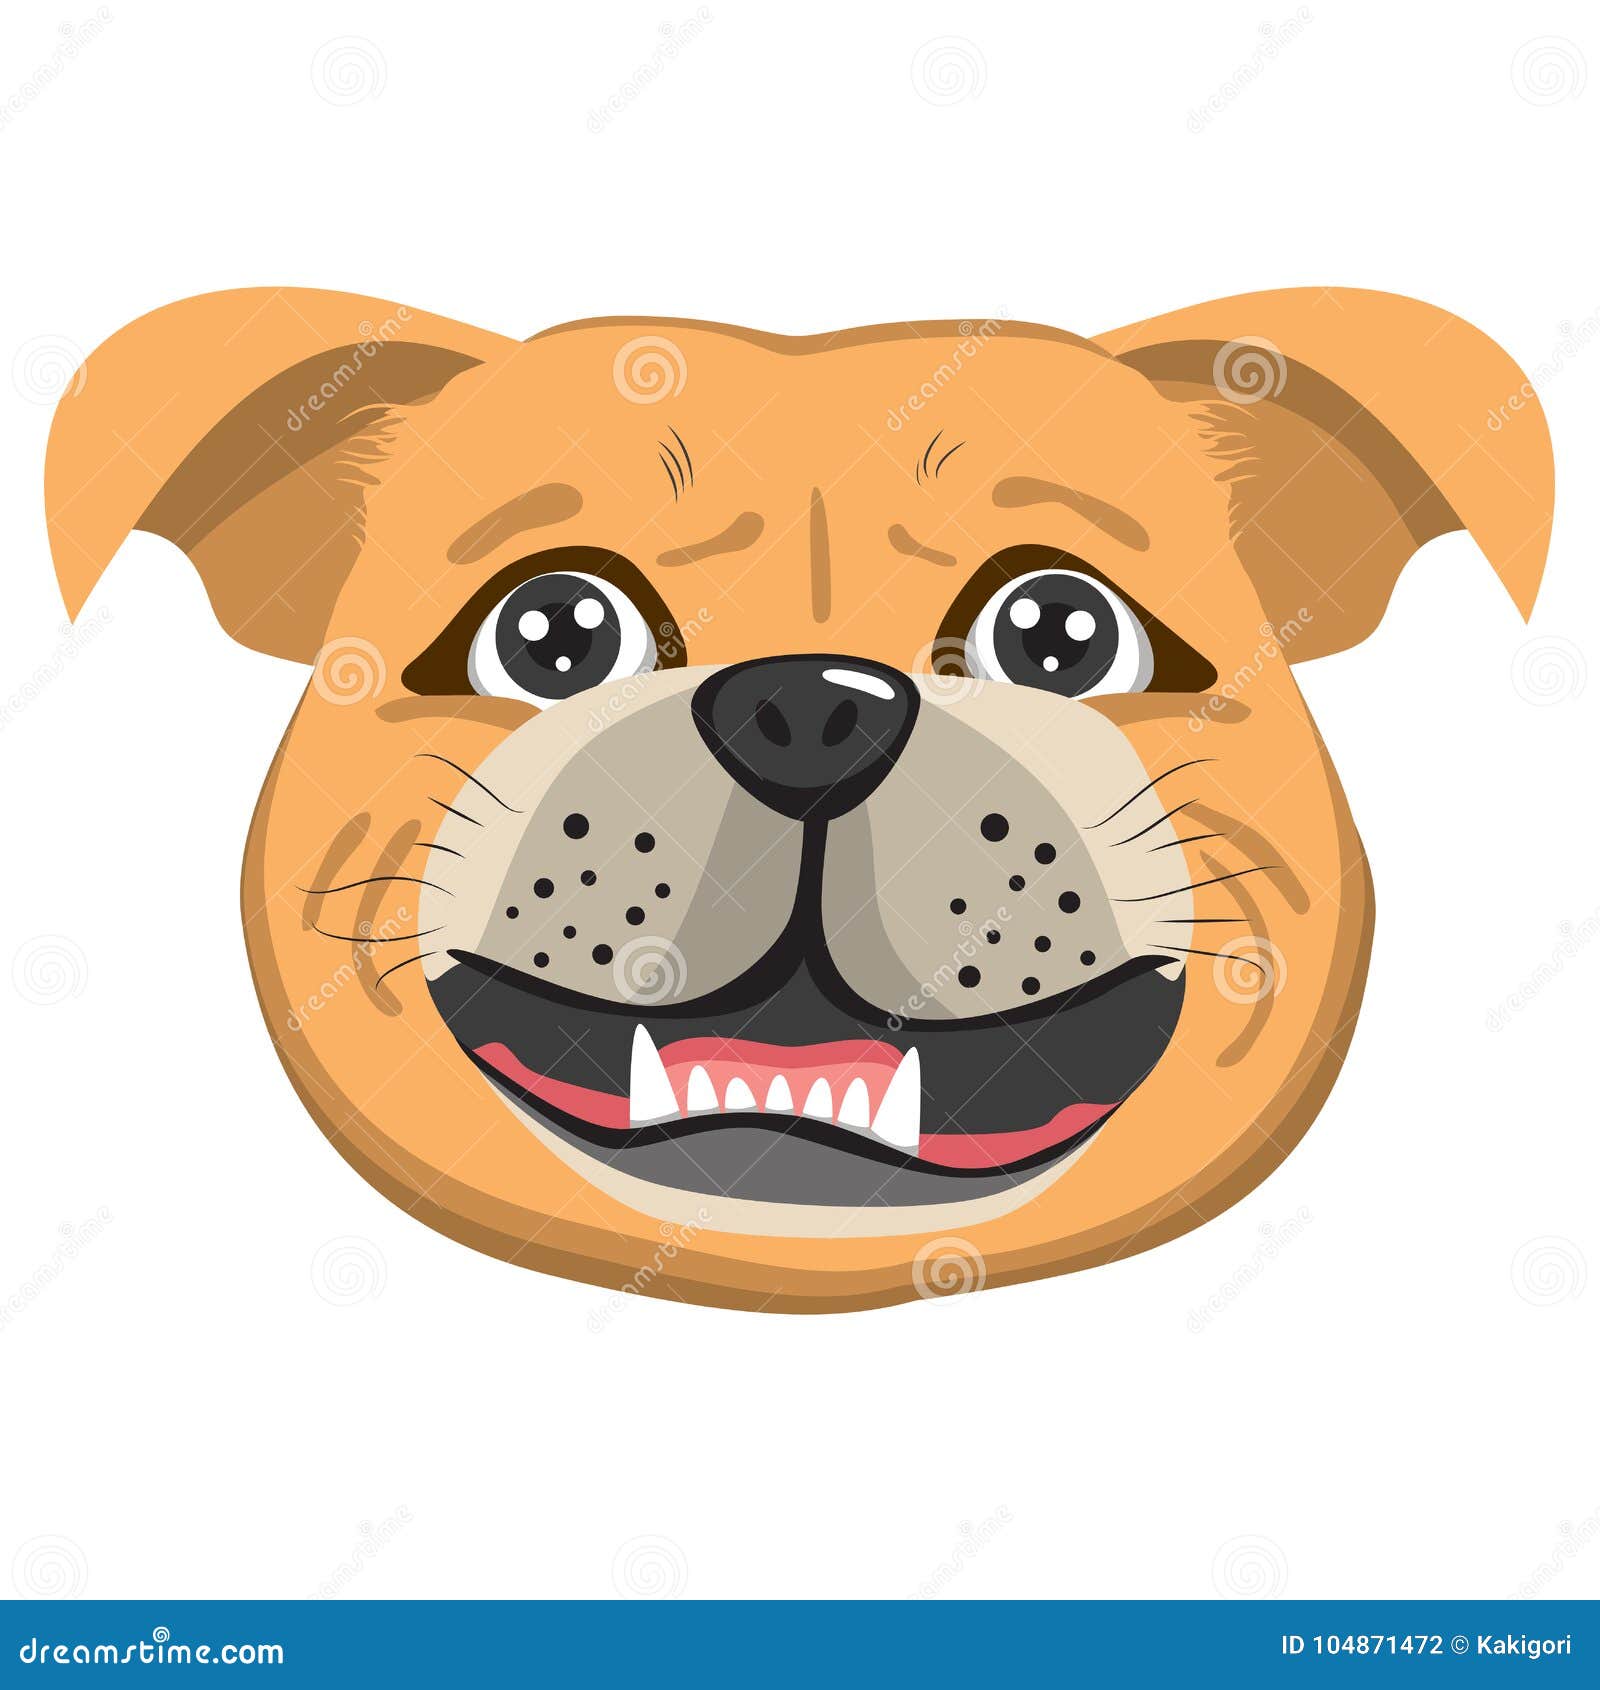 Premium Vector  Pug face portrait dog avatar hand drawn vector cartoon  illustration with funny happy puppy in circle